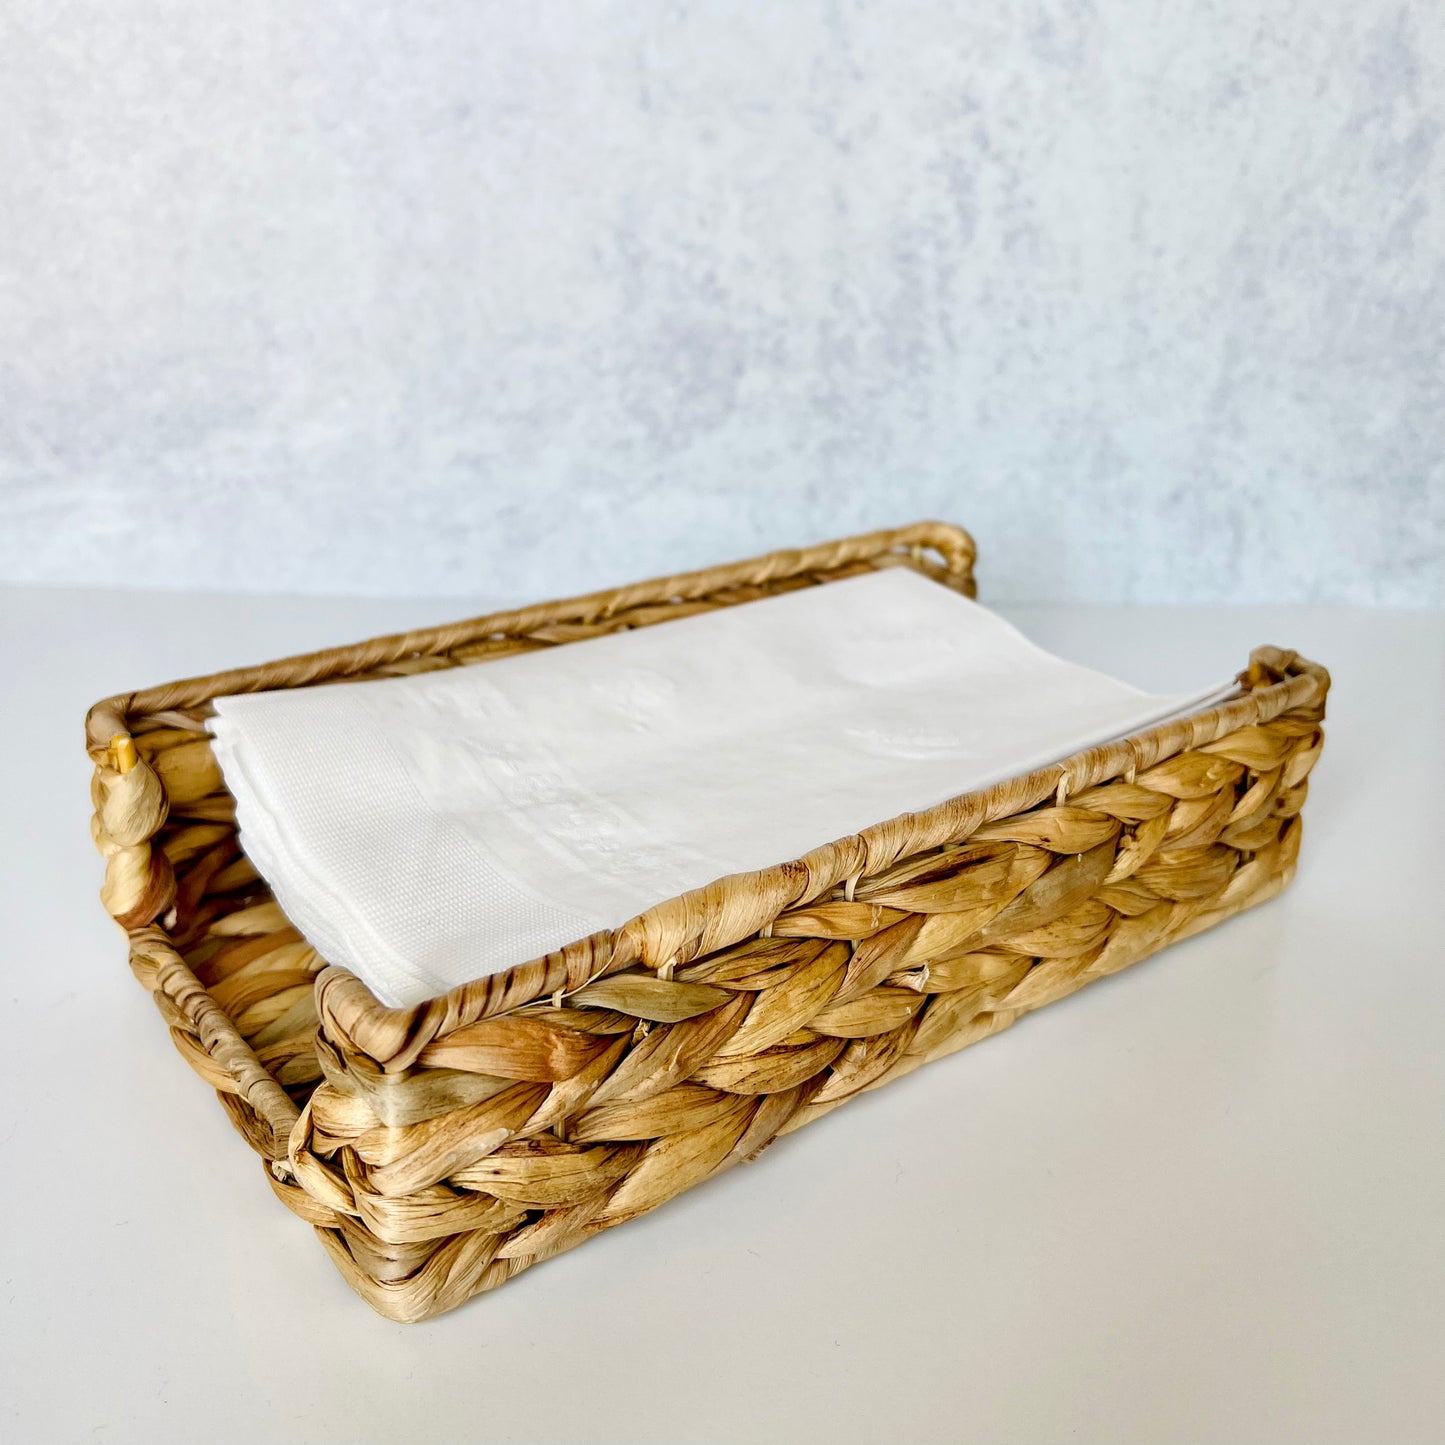 The Hyacinth Napkin Holder filled with napkins - The Offbeat Co.